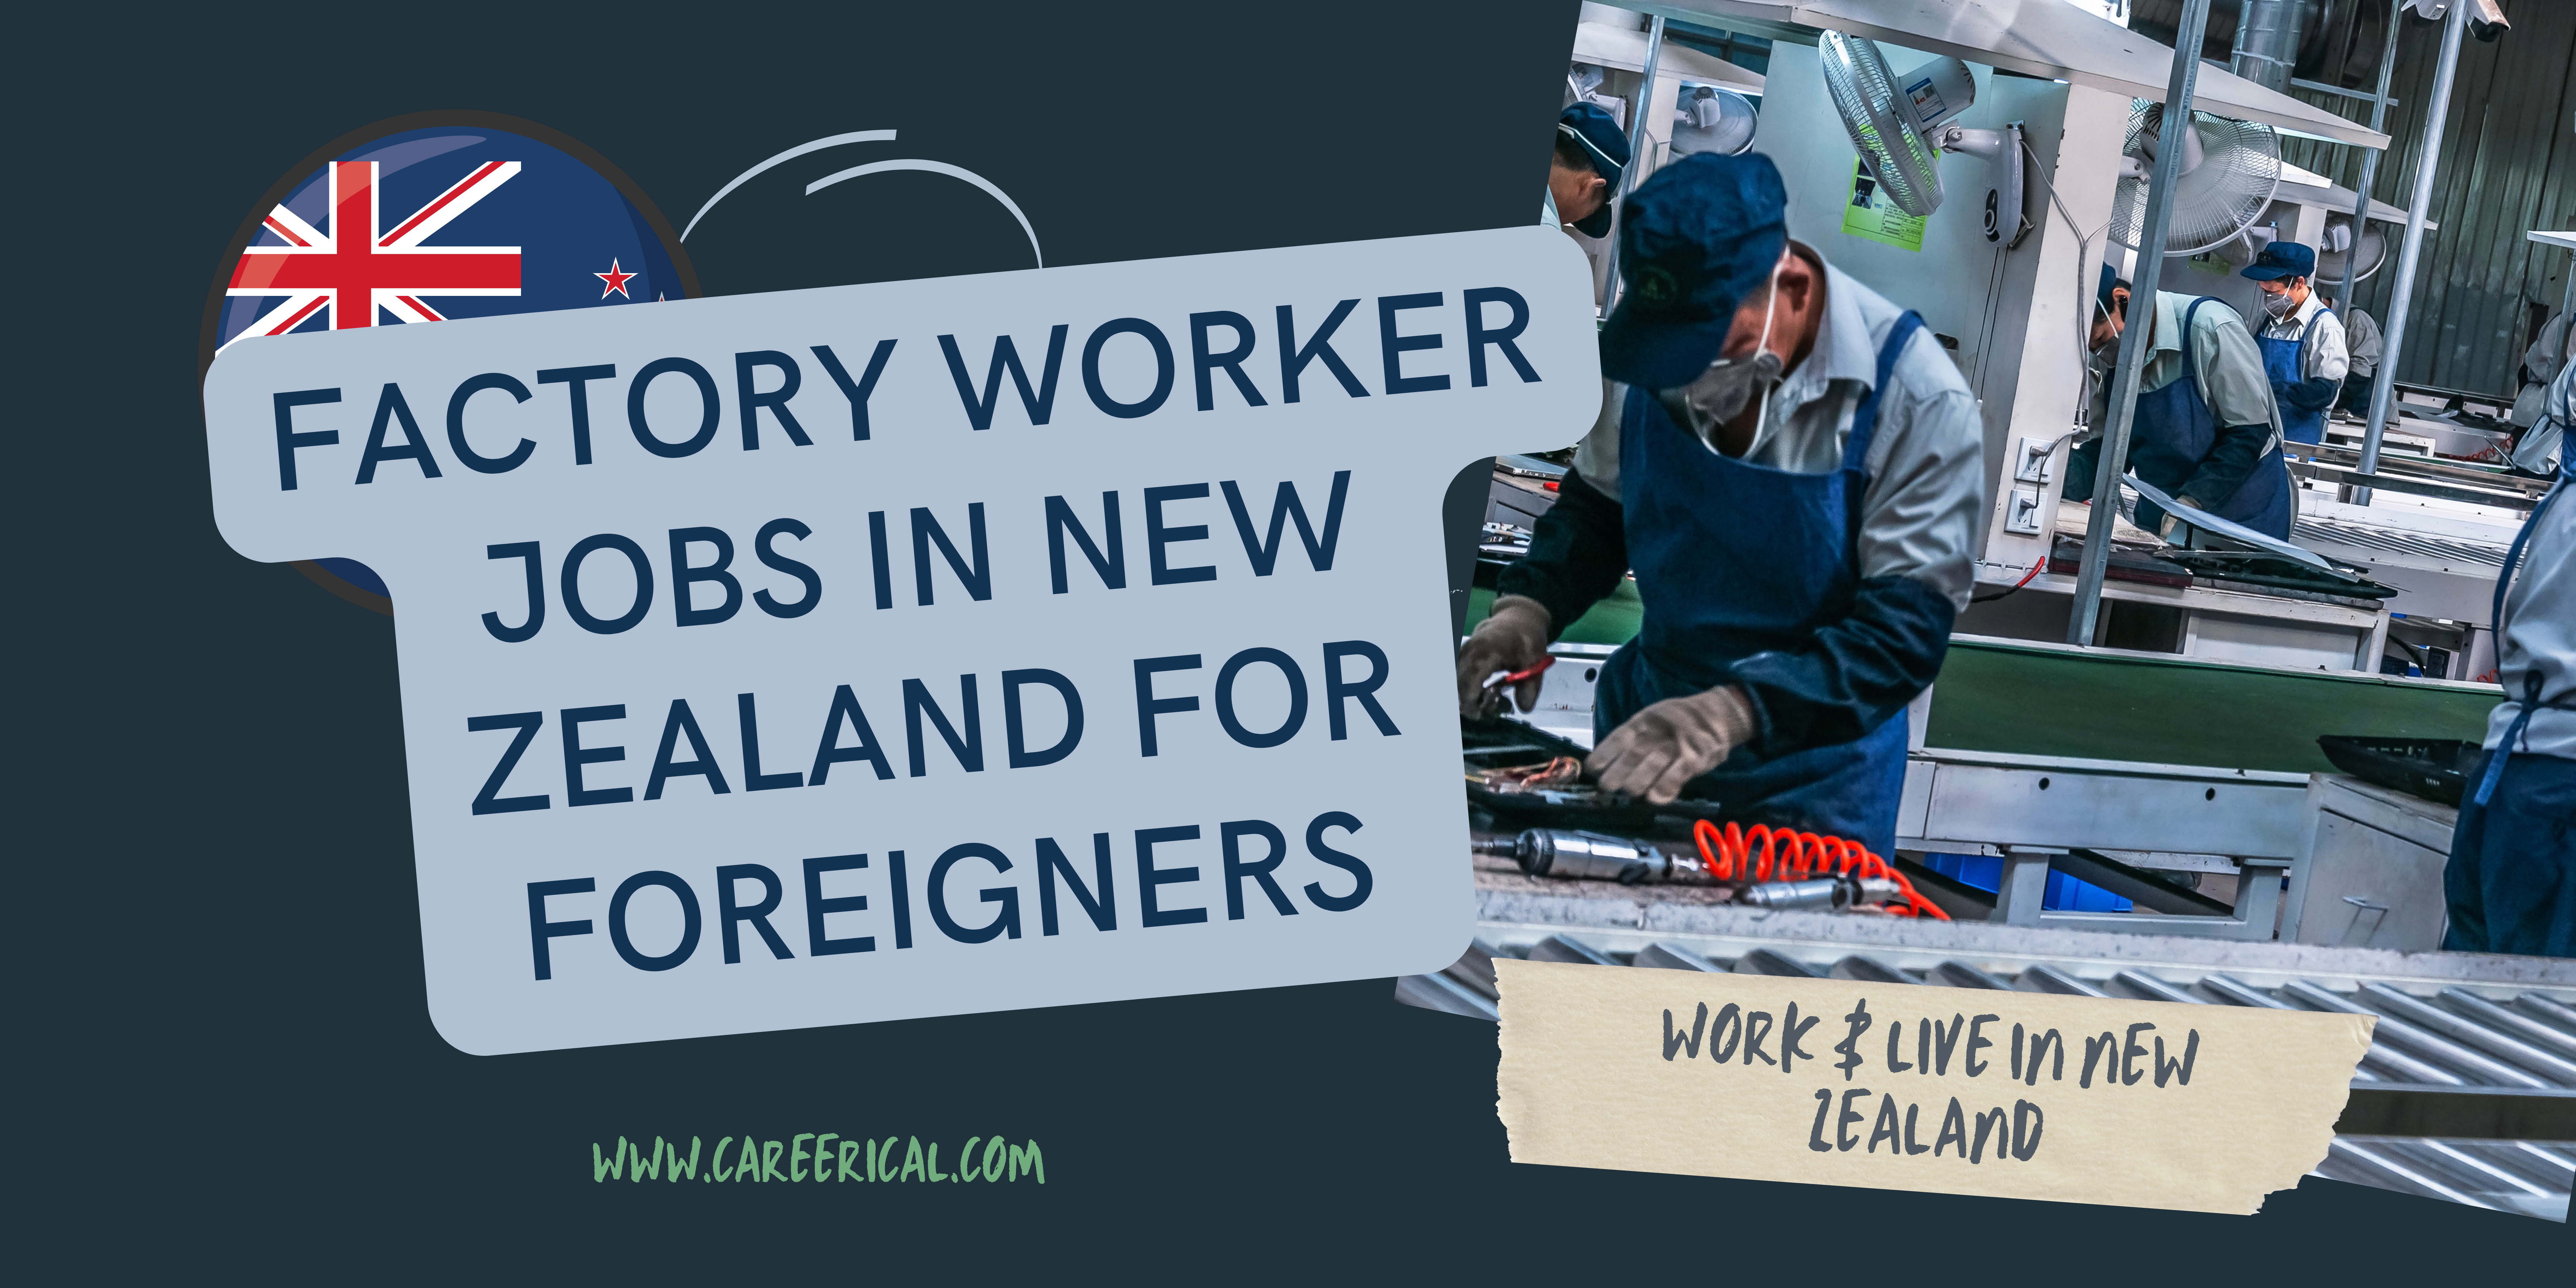 Factory Worker Jobs in New Zealand for Foreigners